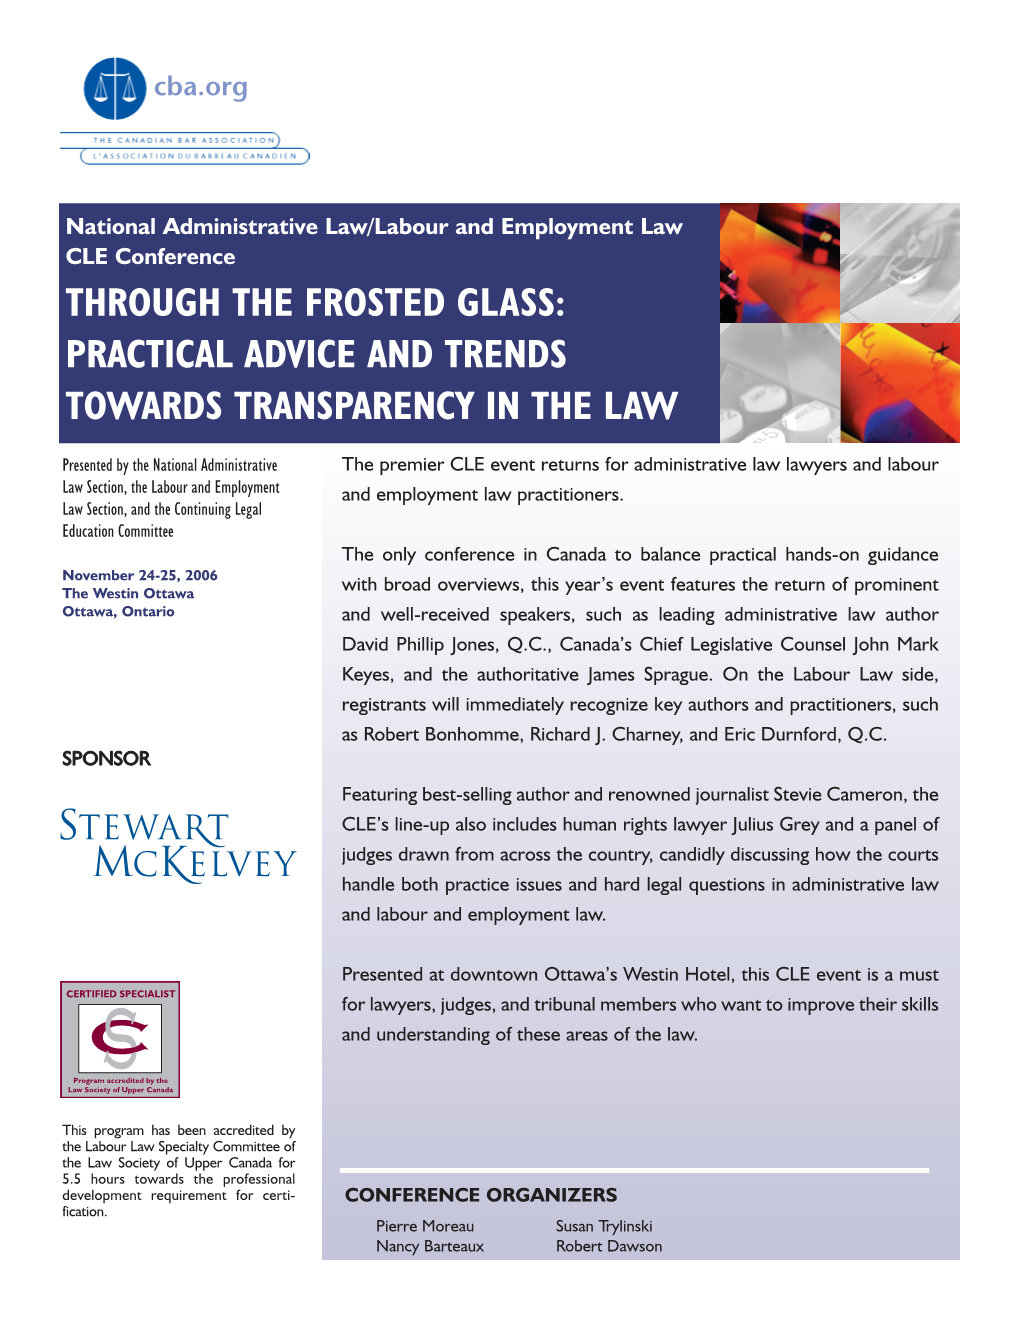 Through the Frosted Glass: Practical Advice and Trends Towards Transparency in the Law